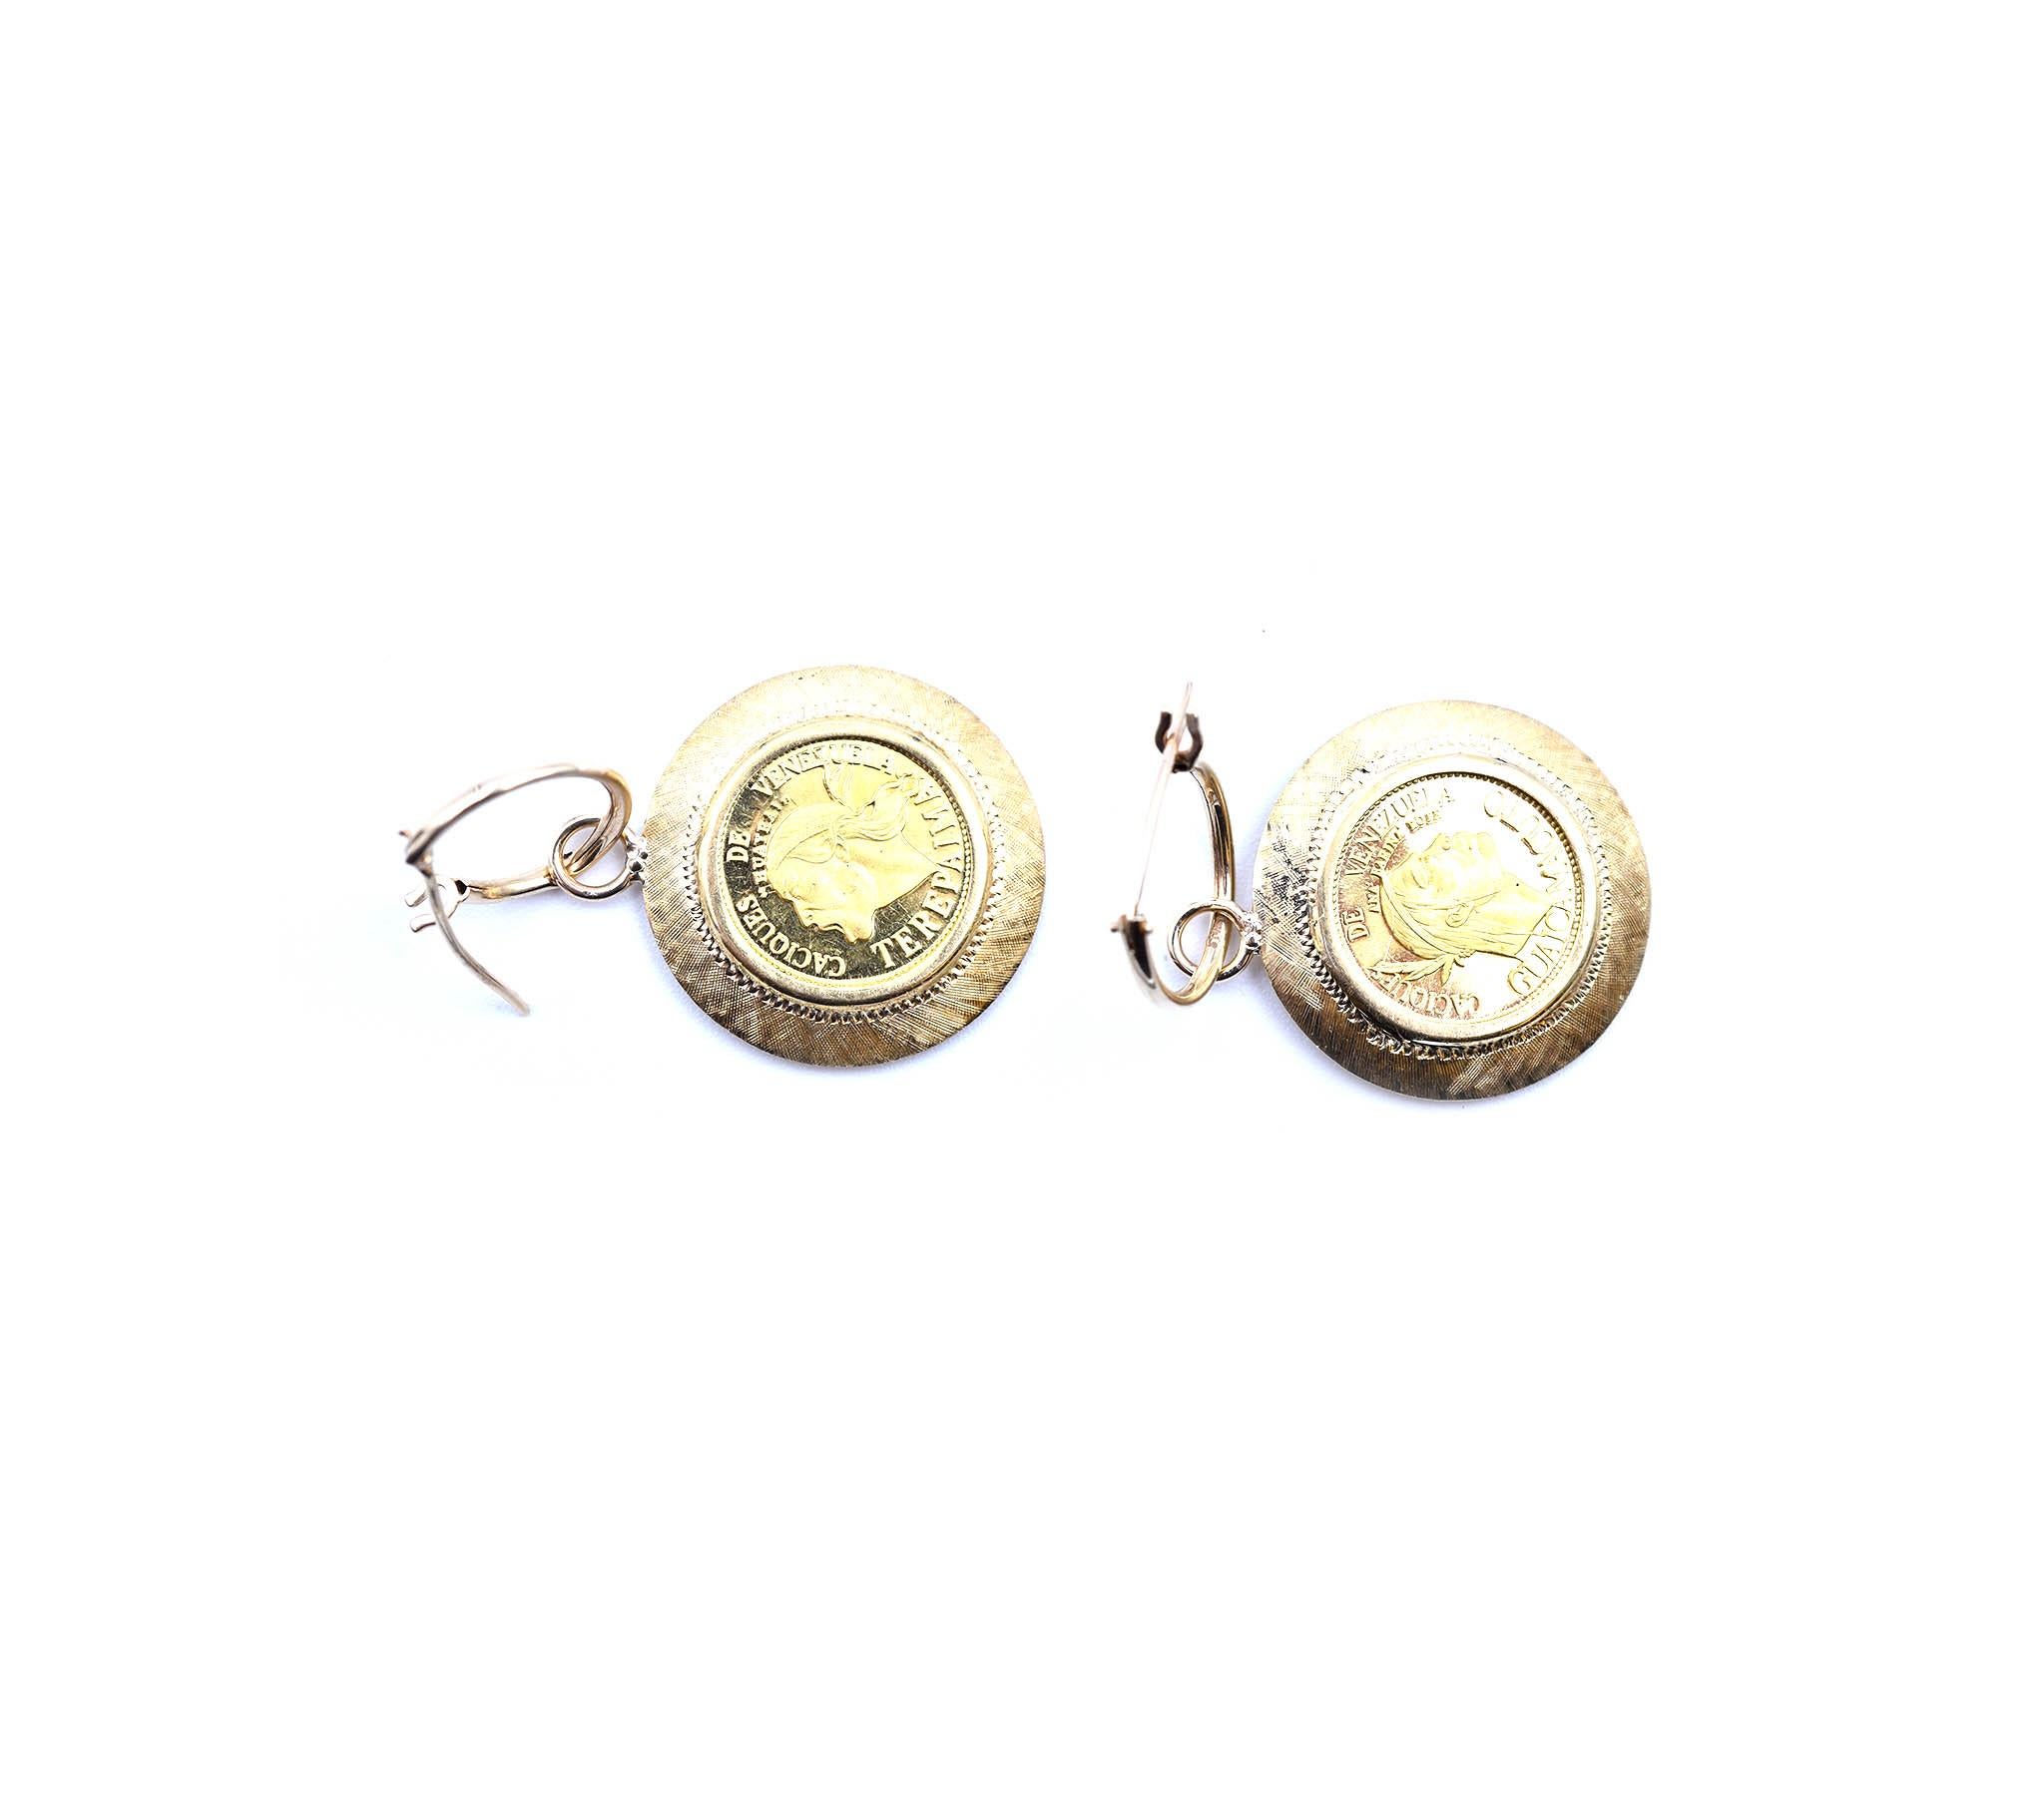 Designer: custom design
Material: 18k yellow gold and 14k yellow gold 
Dimensions: earring measure 35.20mm in length and have a diameter of 20mm
Fastenings: huggie style
Weight: 6.40 grams